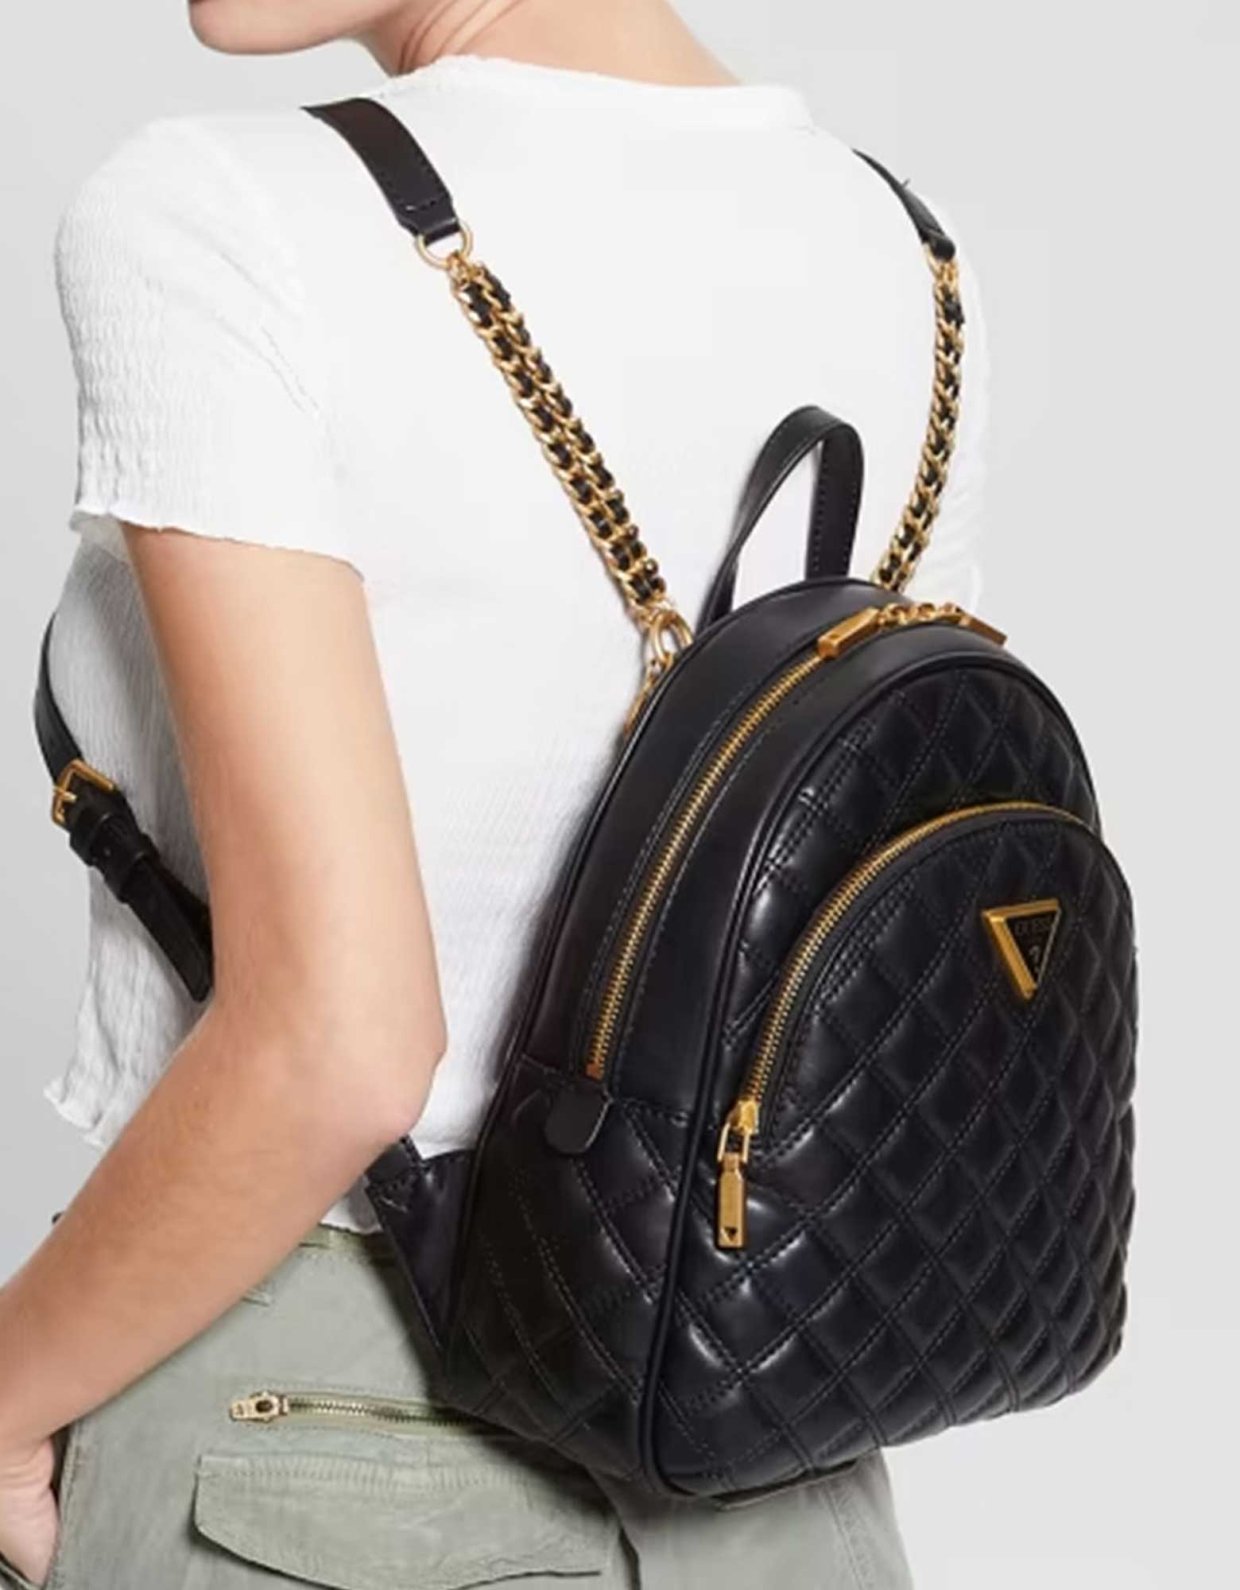 Guess Giully backpack black